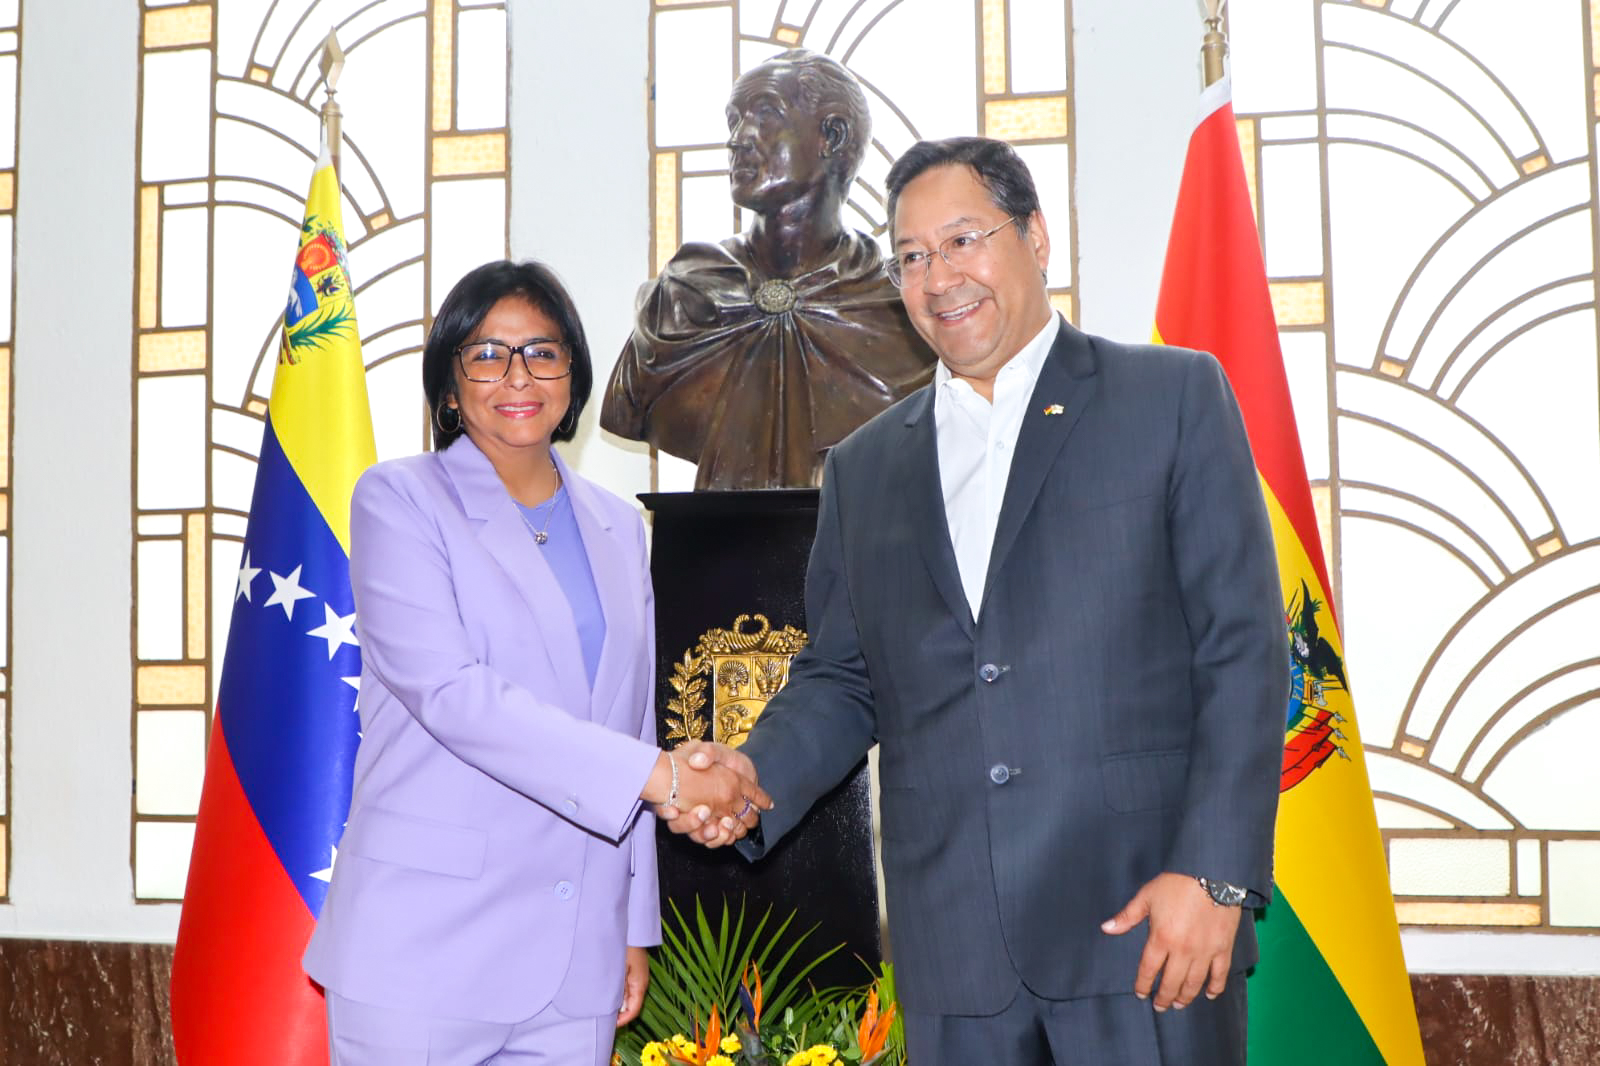 President of Bolivia honored the Liberator